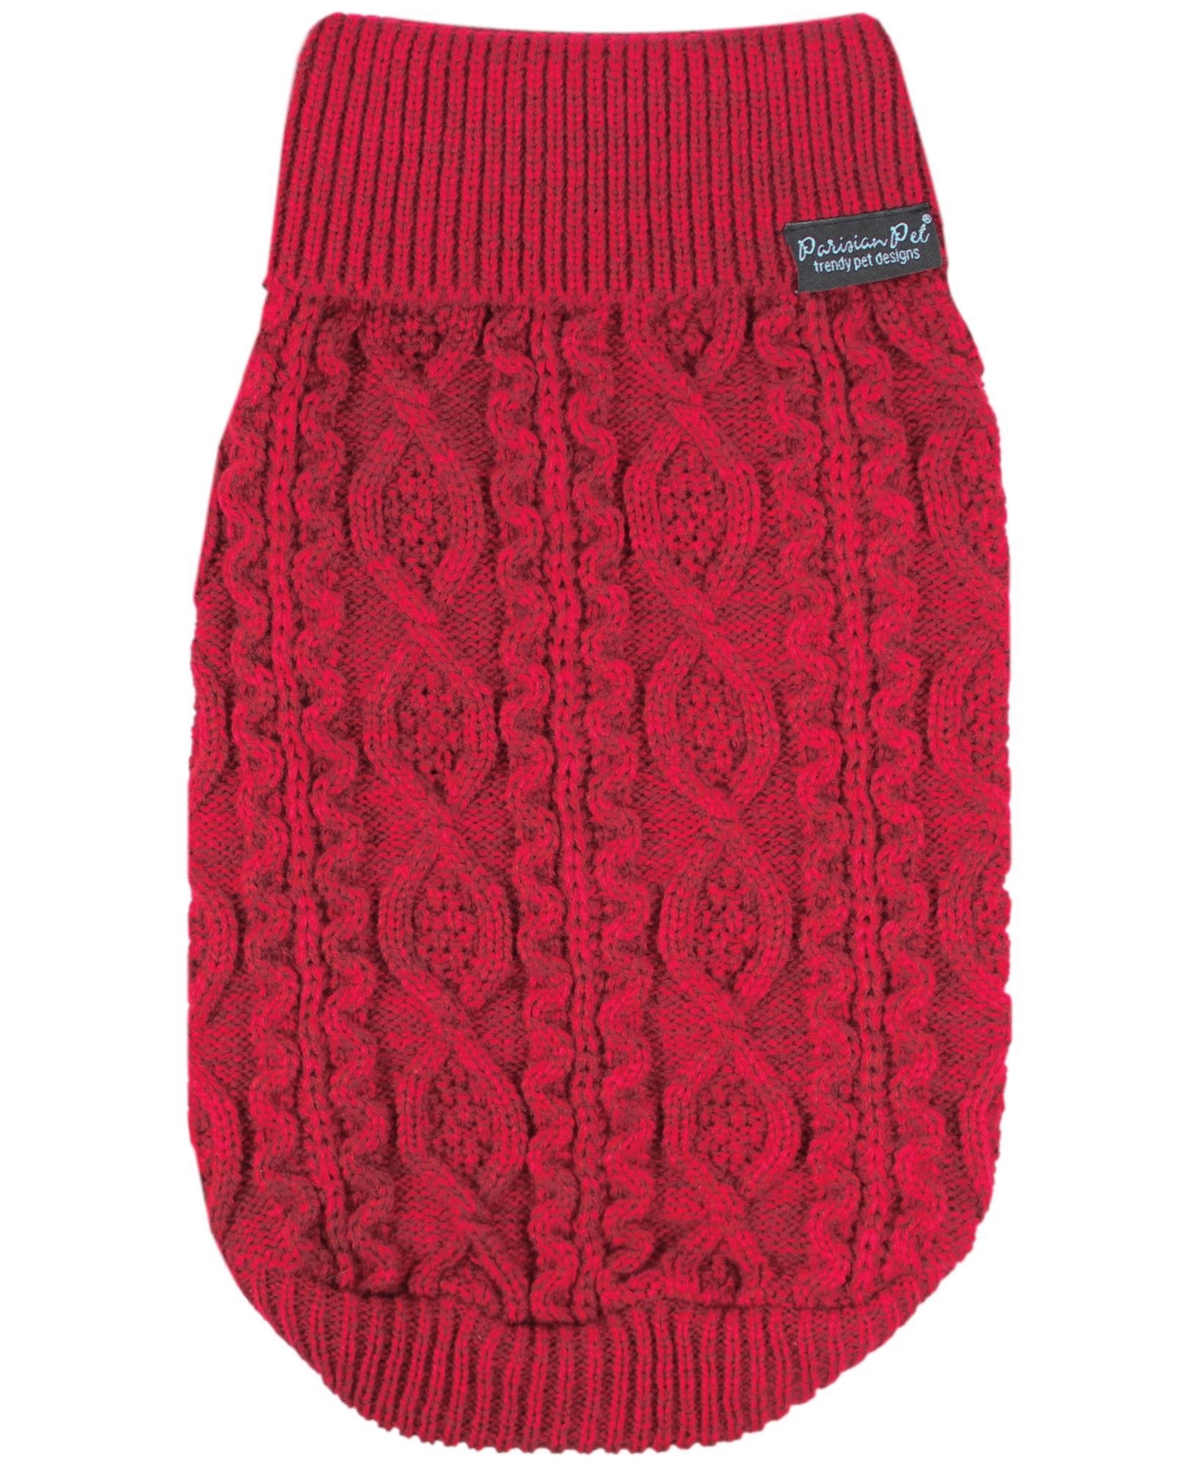 Cable Knit Dog Sweater - Red